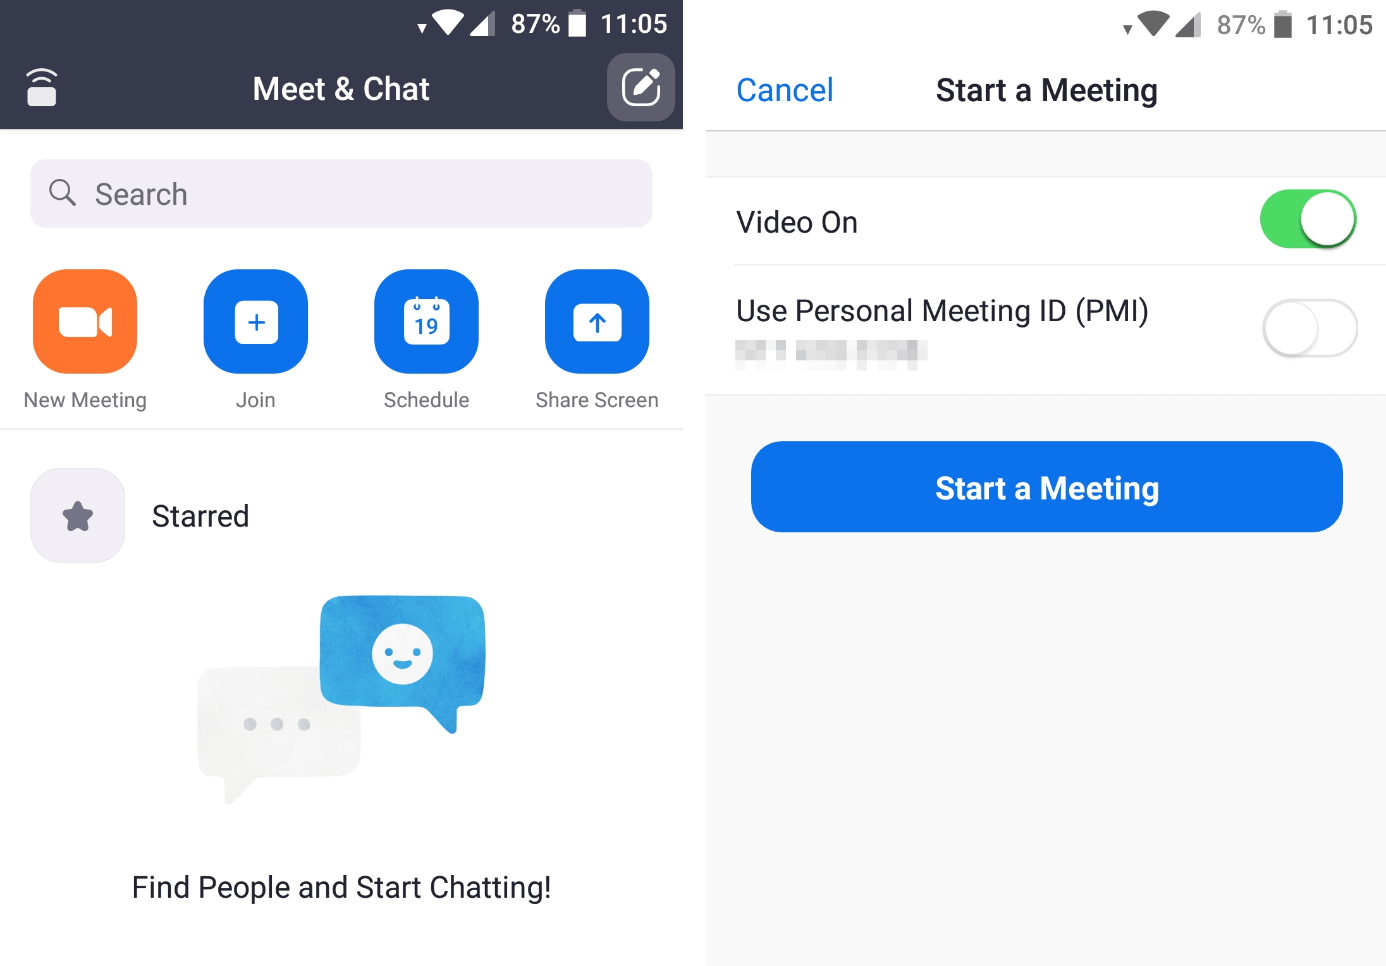 Starting a meeting in the Zoom app for Android